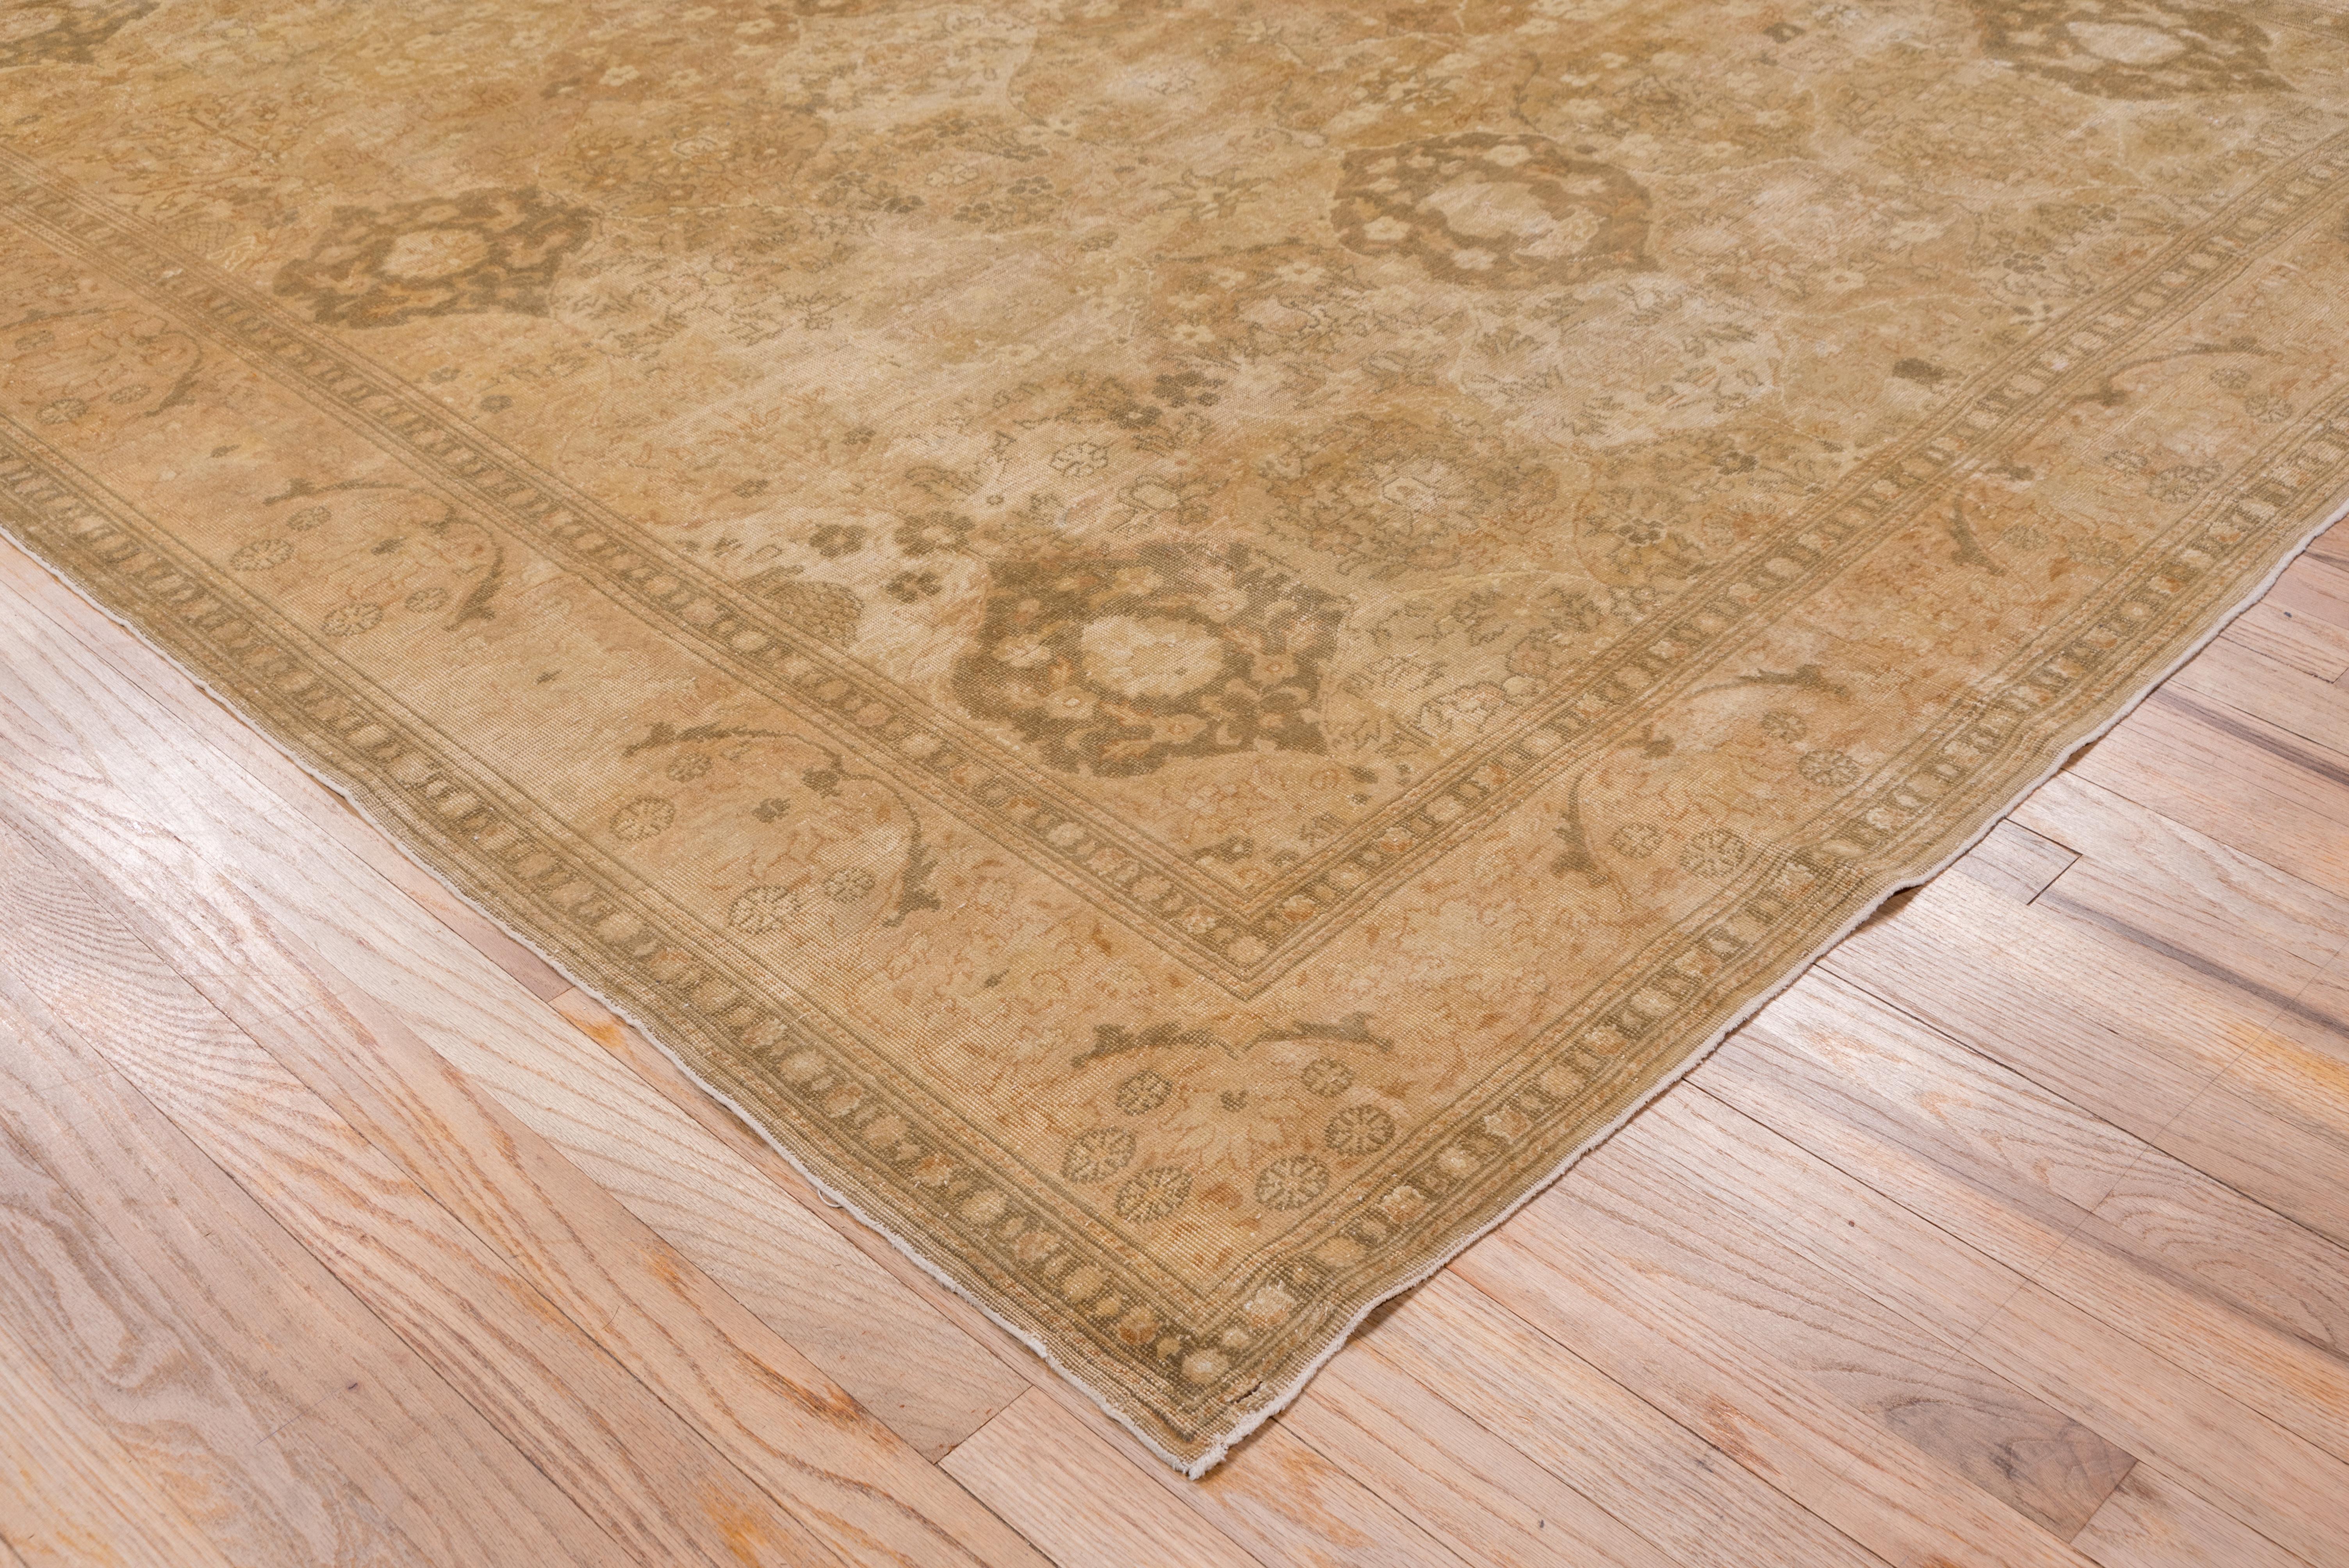 Antique Sivas Carpet In Good Condition For Sale In New York, NY